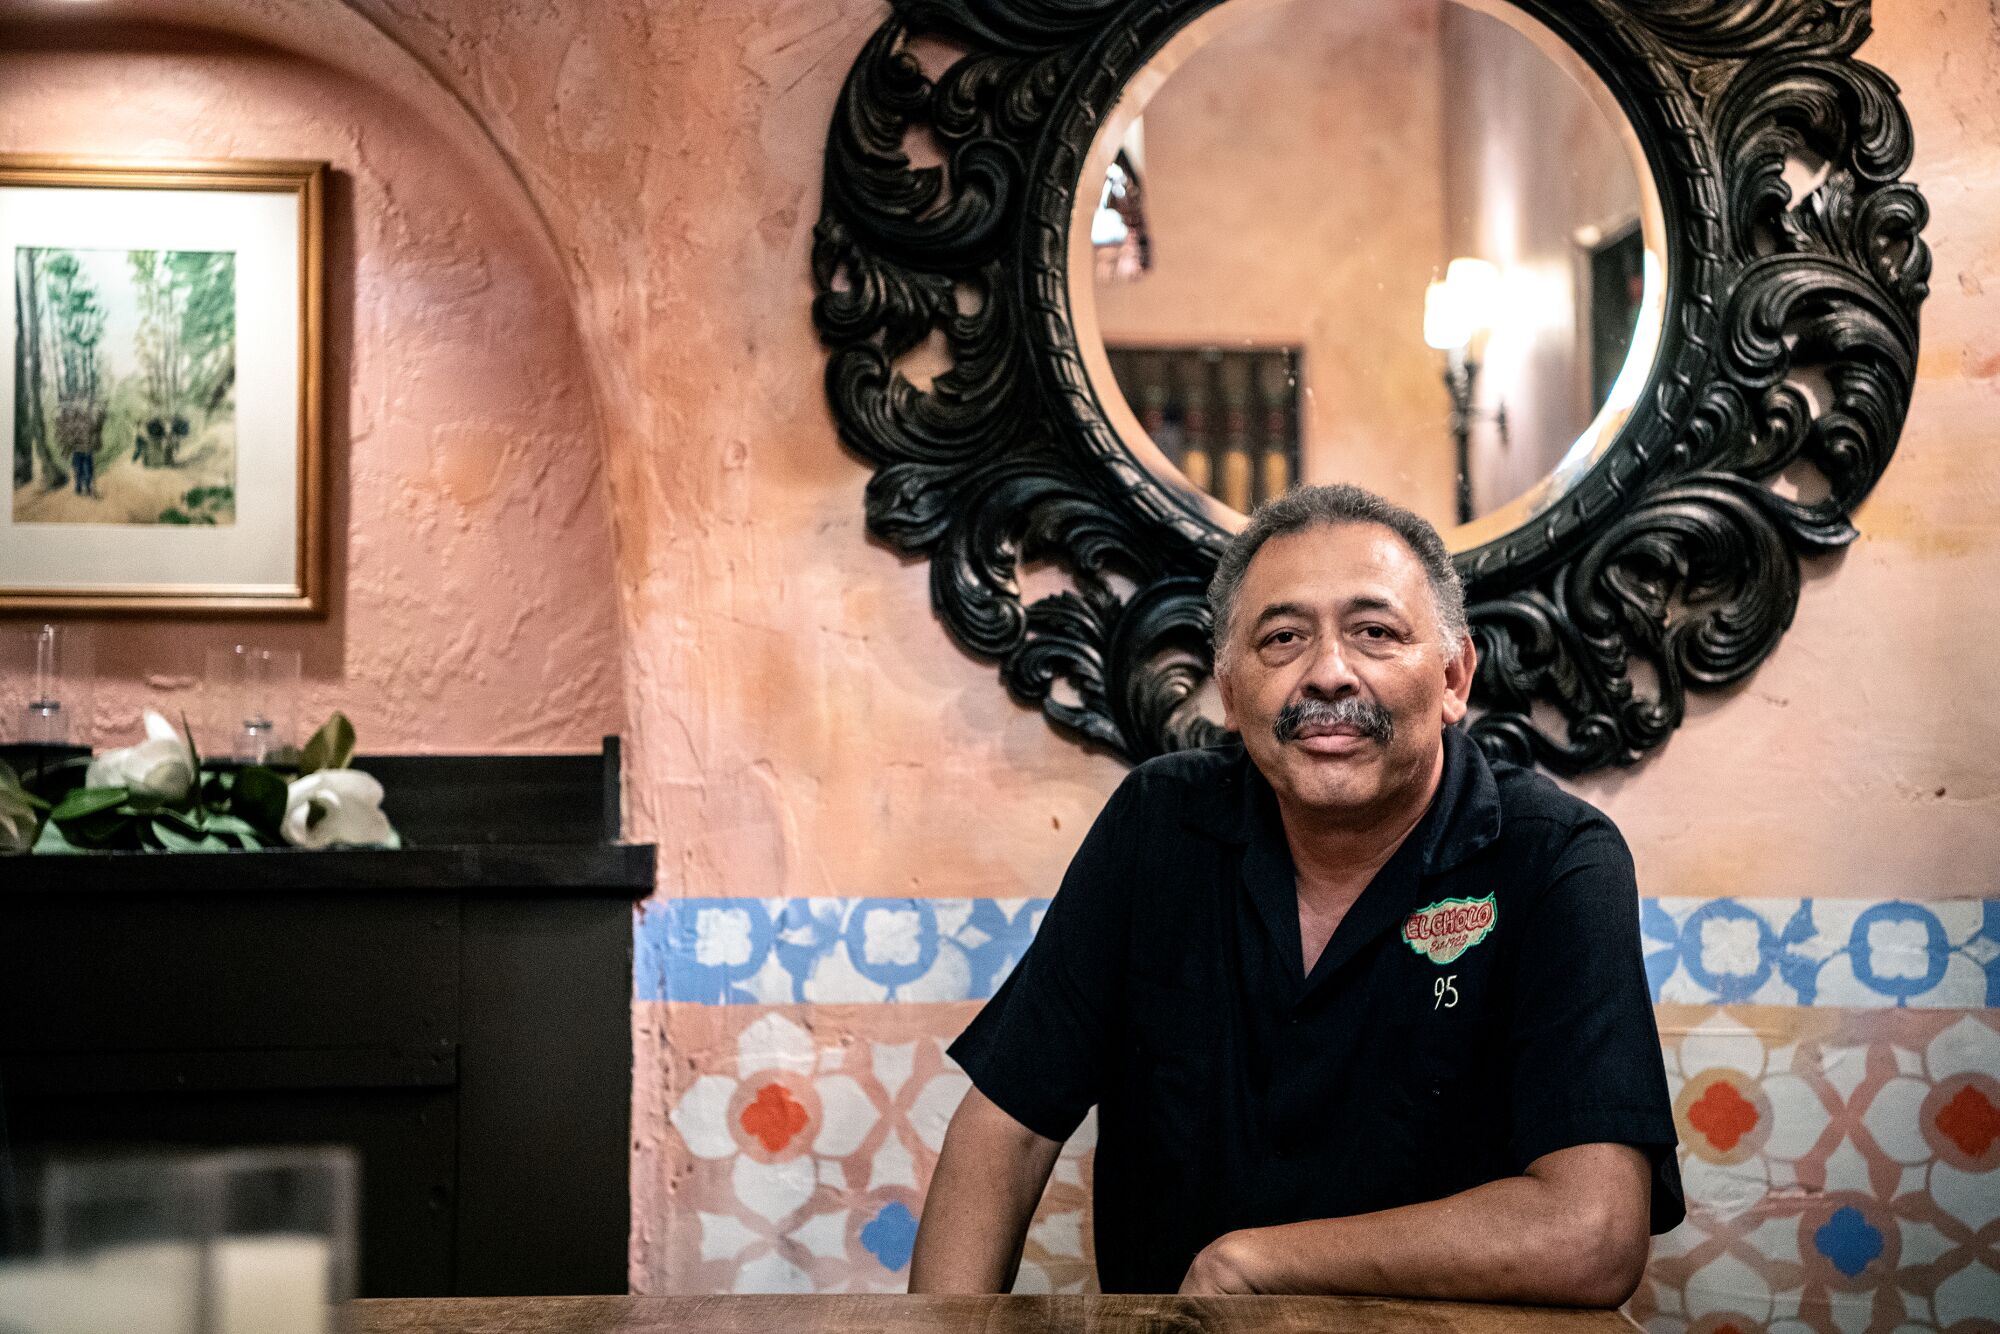 Jaime Cornelio seated at a table, with a circular mirror on the wall behind him.